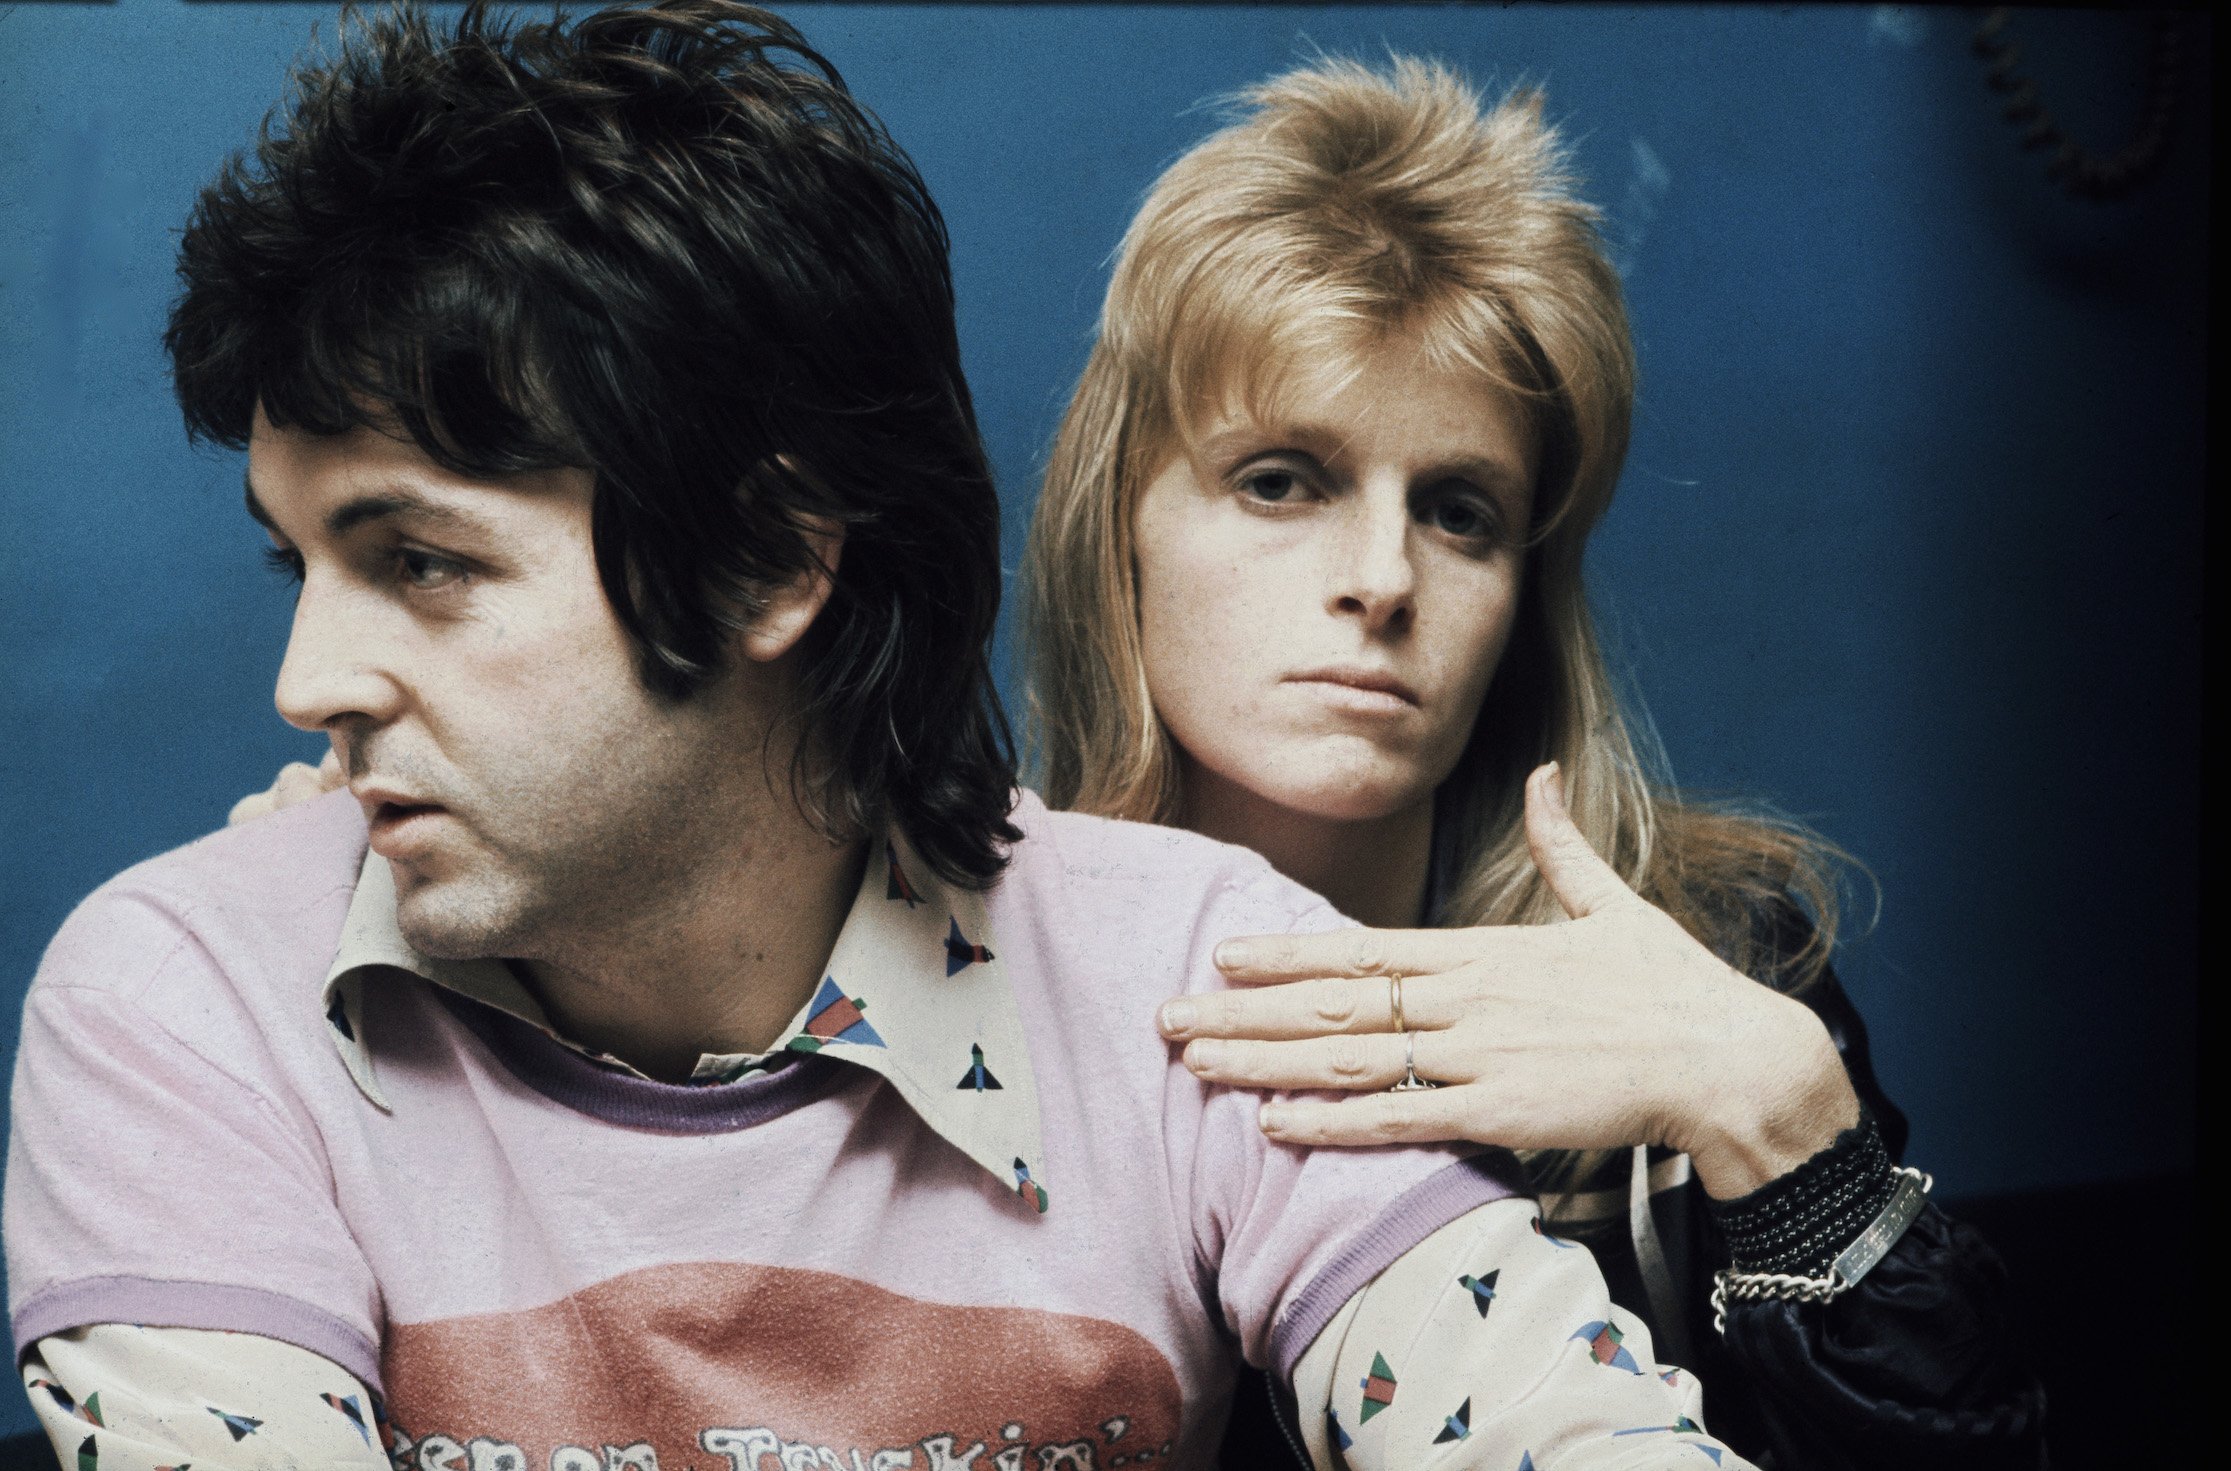 The Song Paul McCartney Wrote When He and Linda ‘First Got Together’